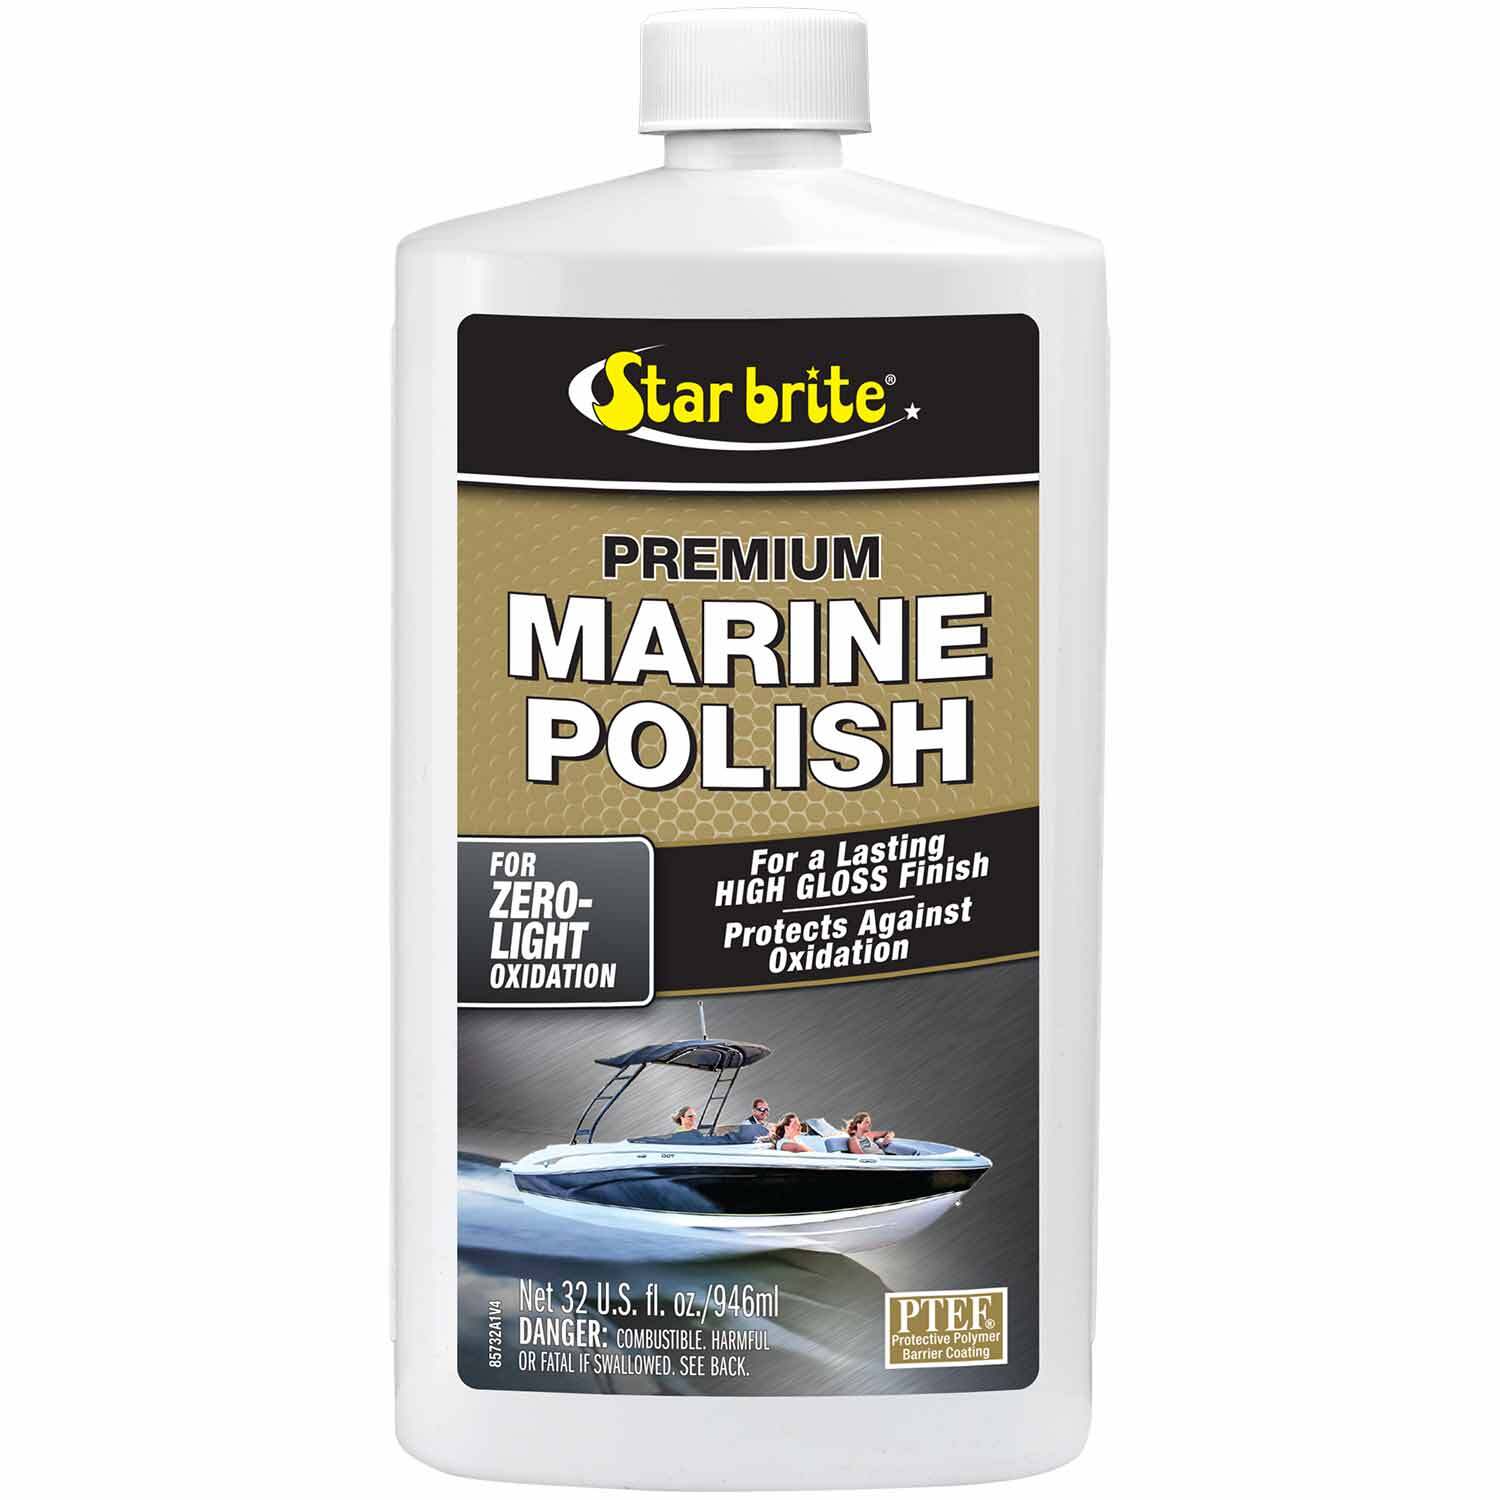 Star brite Marine Mildew Stain Remover Gel 16 oz, Removes Stains on  Contact